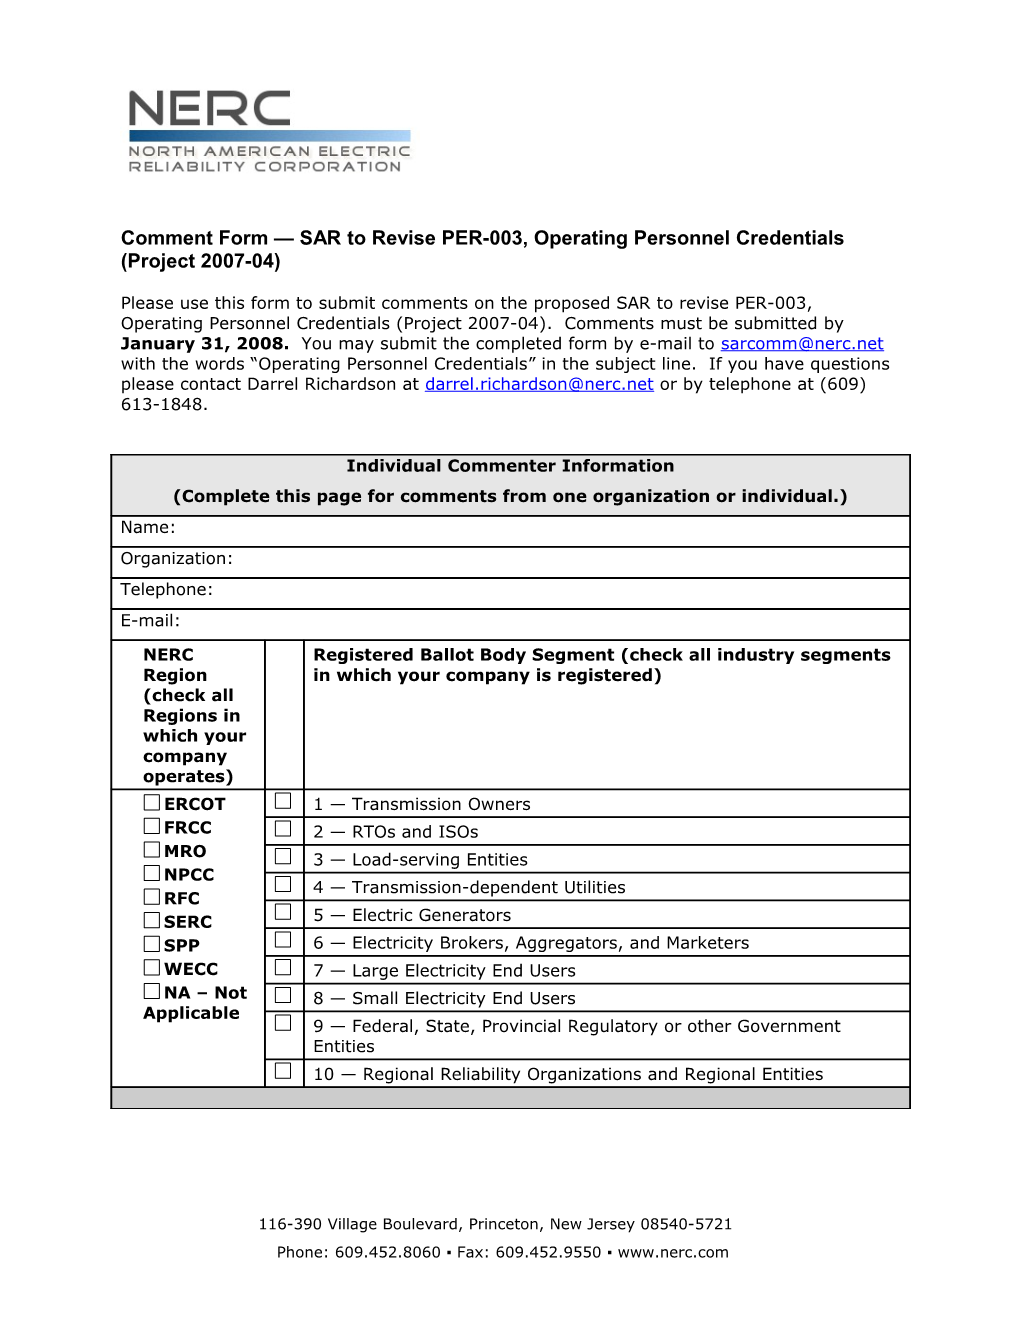 Comment Form Certifying System Operators SAR (Project 2007-04)